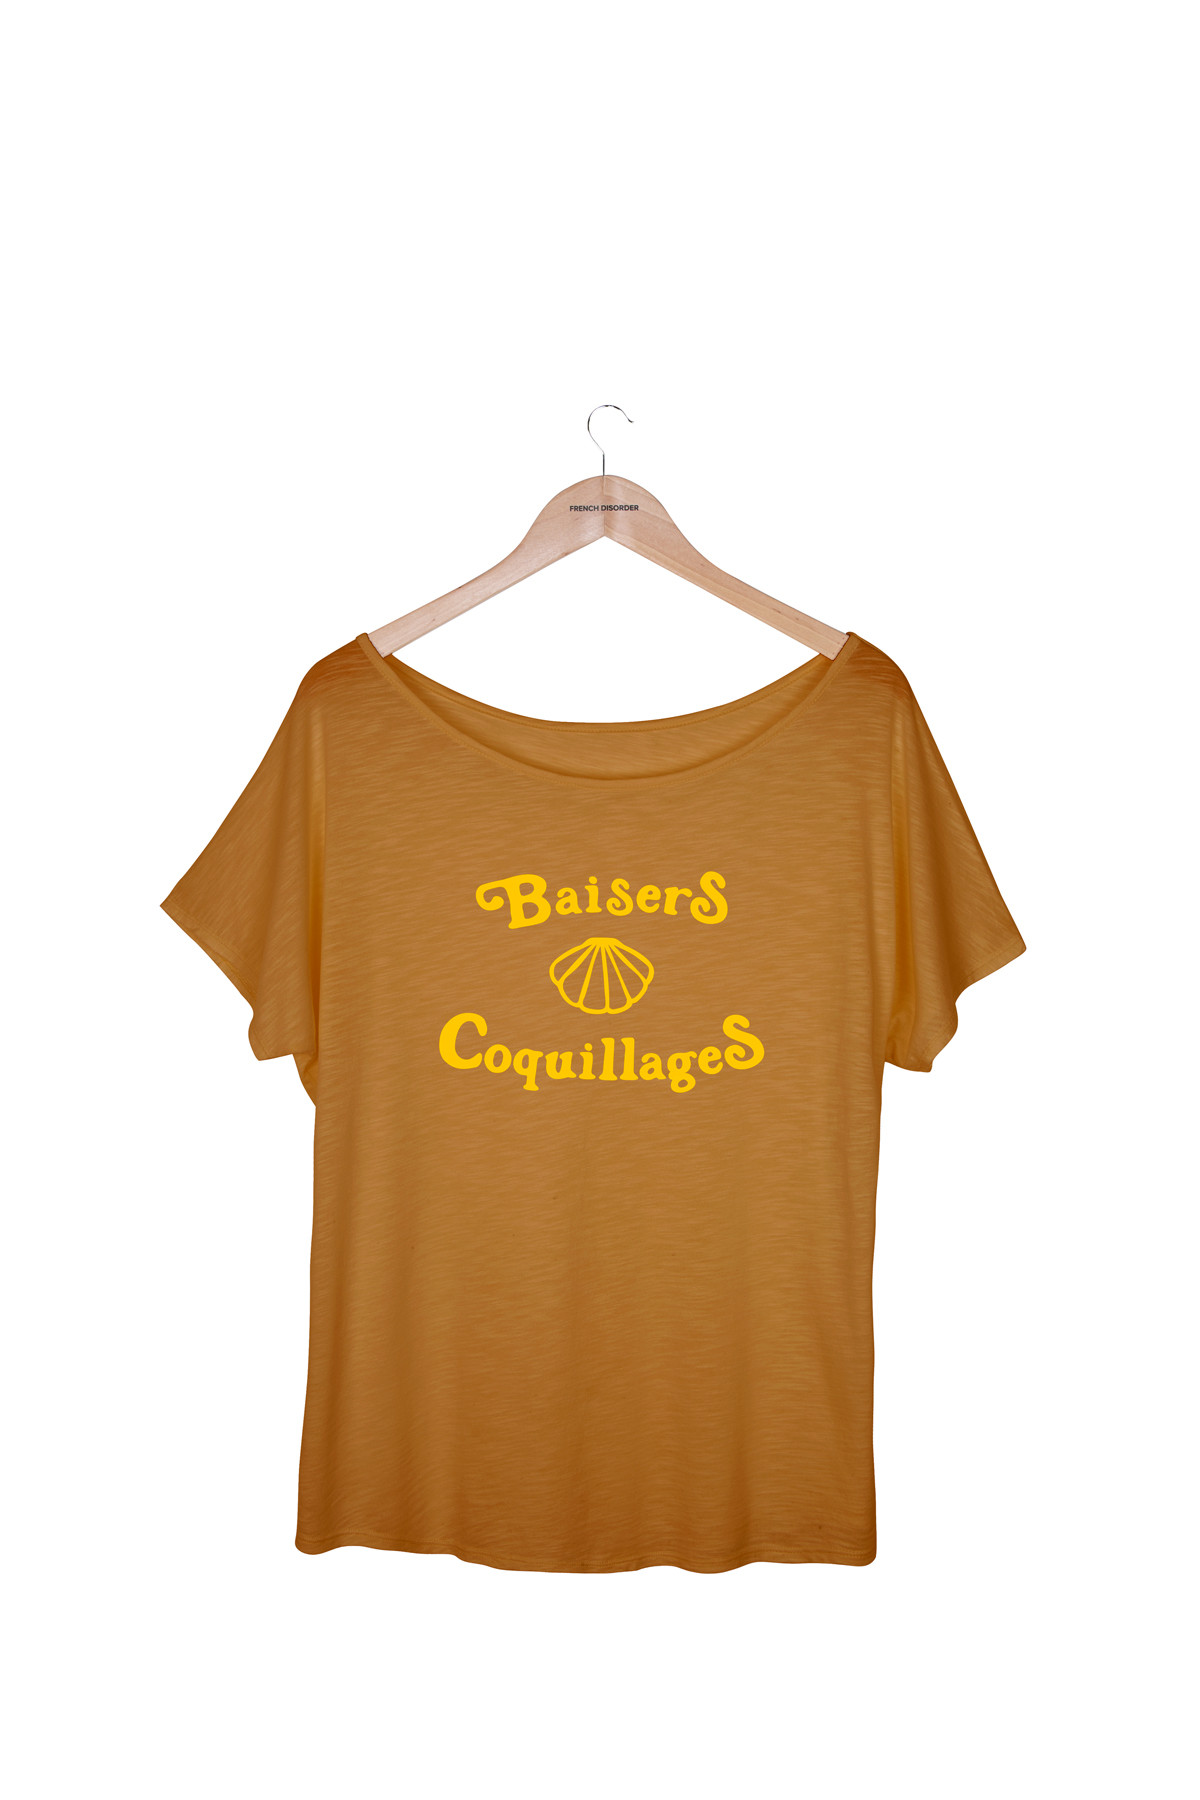 Tshirt flammé BAISERS & COQUILLAGES French Disorder